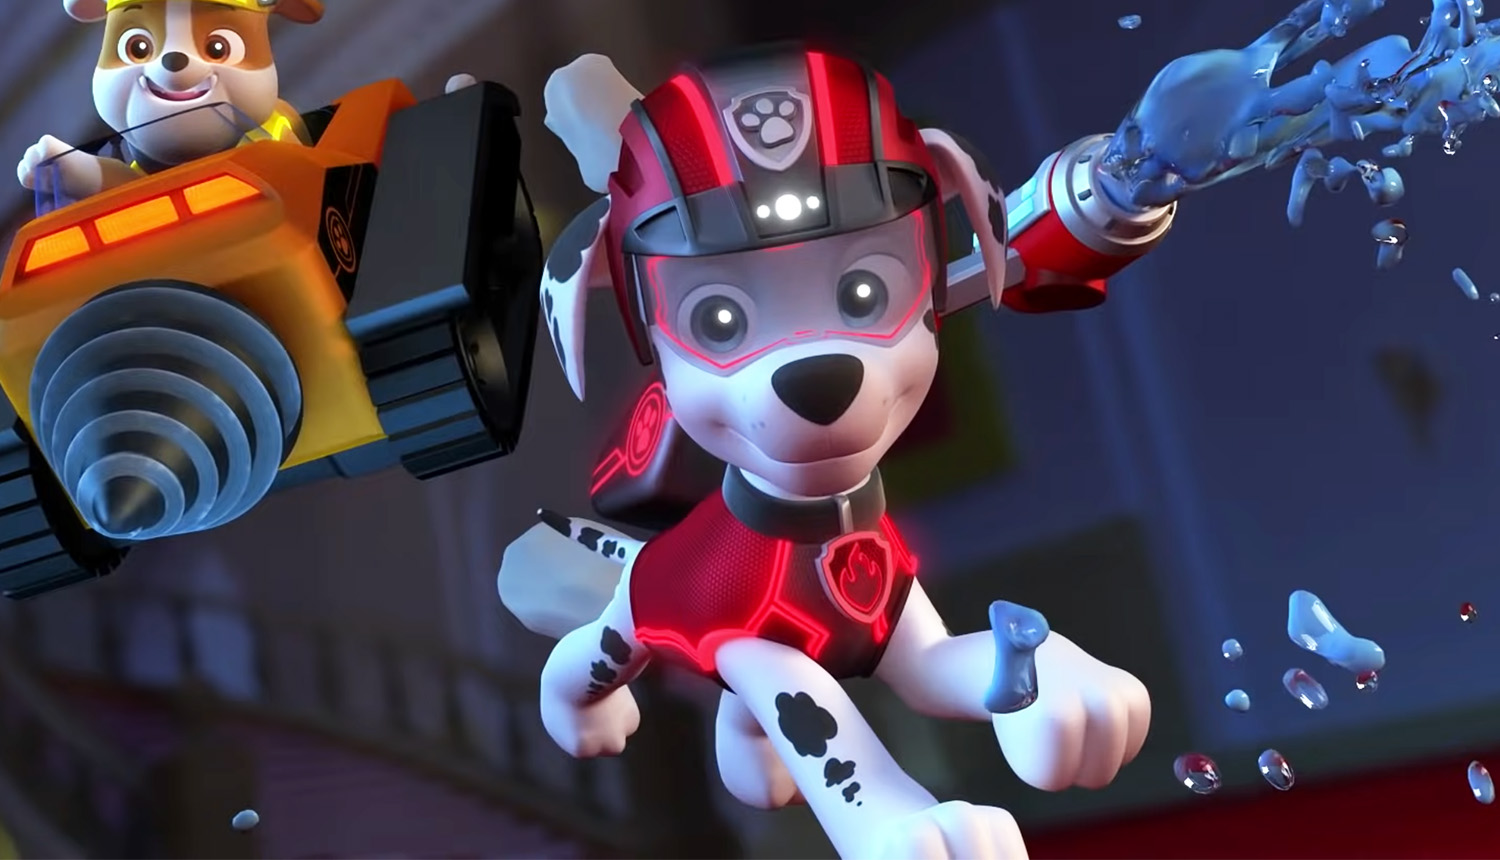 Paw Patrol: The Movie - Plugged In